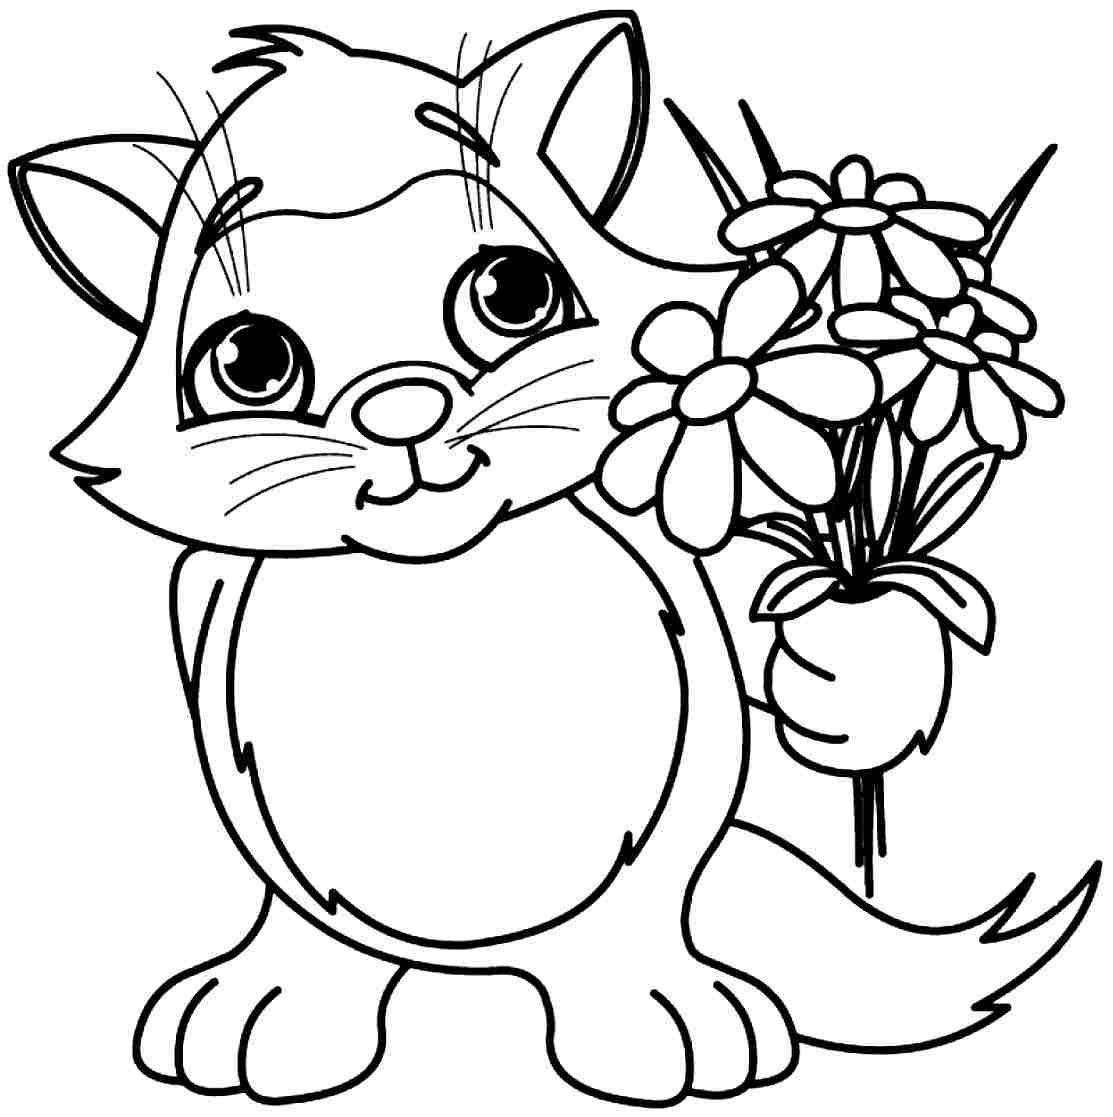 Free Printable Flower Coloring Pages
 Flower